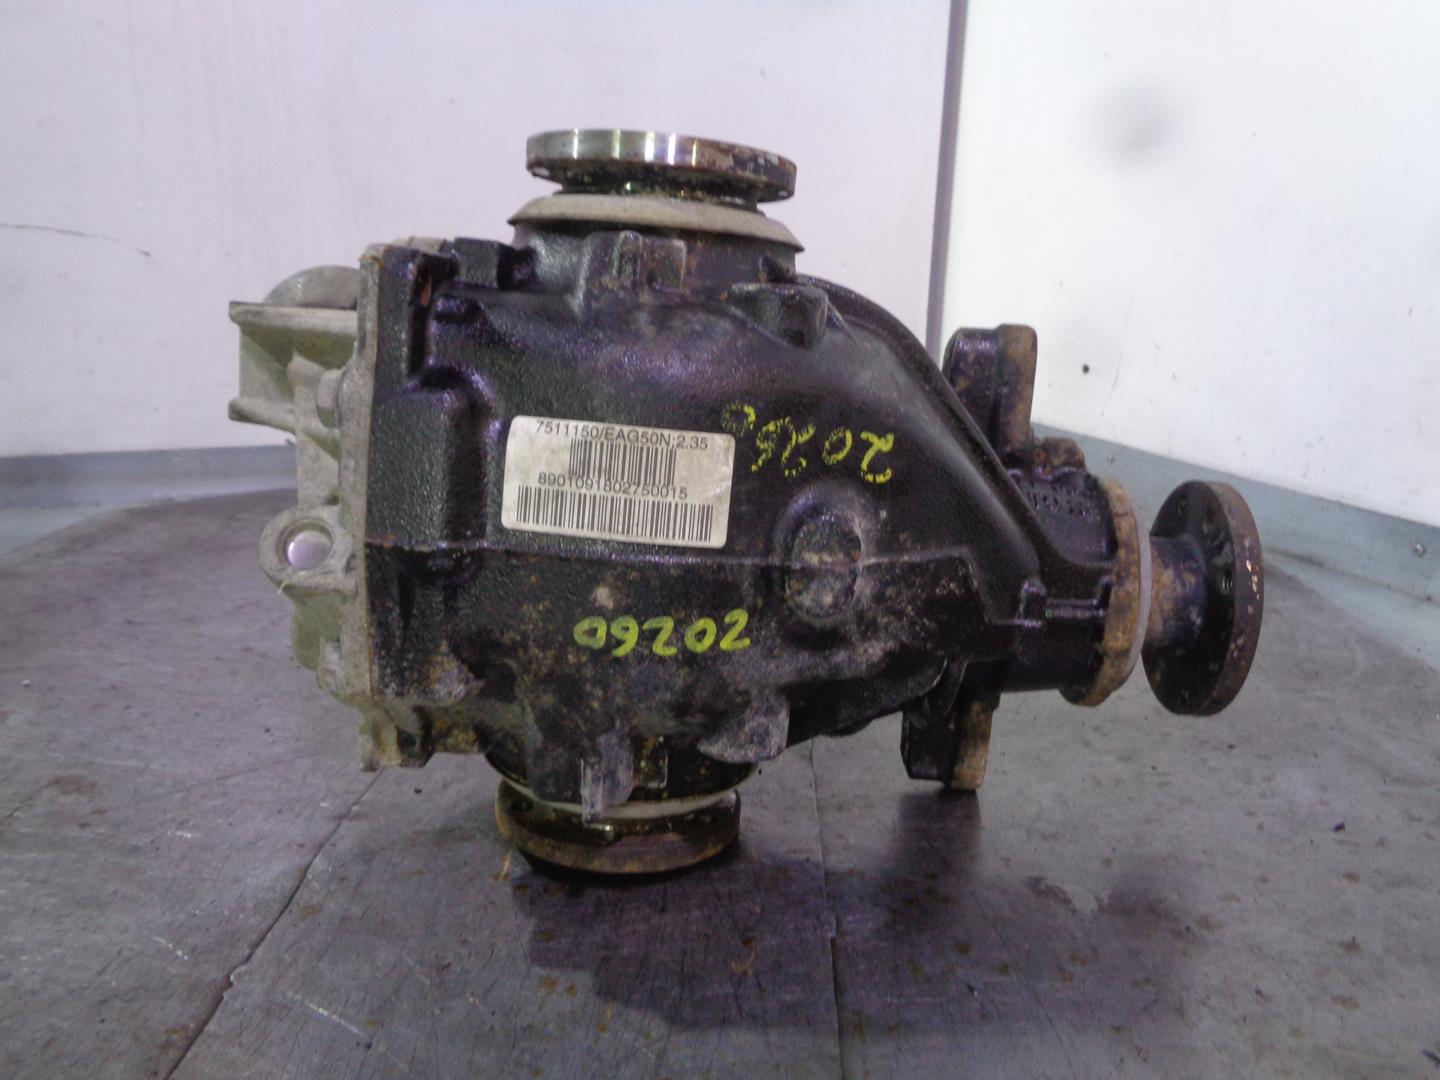 BMW 3 Series E46 (1997-2006) Rear Differential 7511150, 8901091802750015, 2.35 24550706